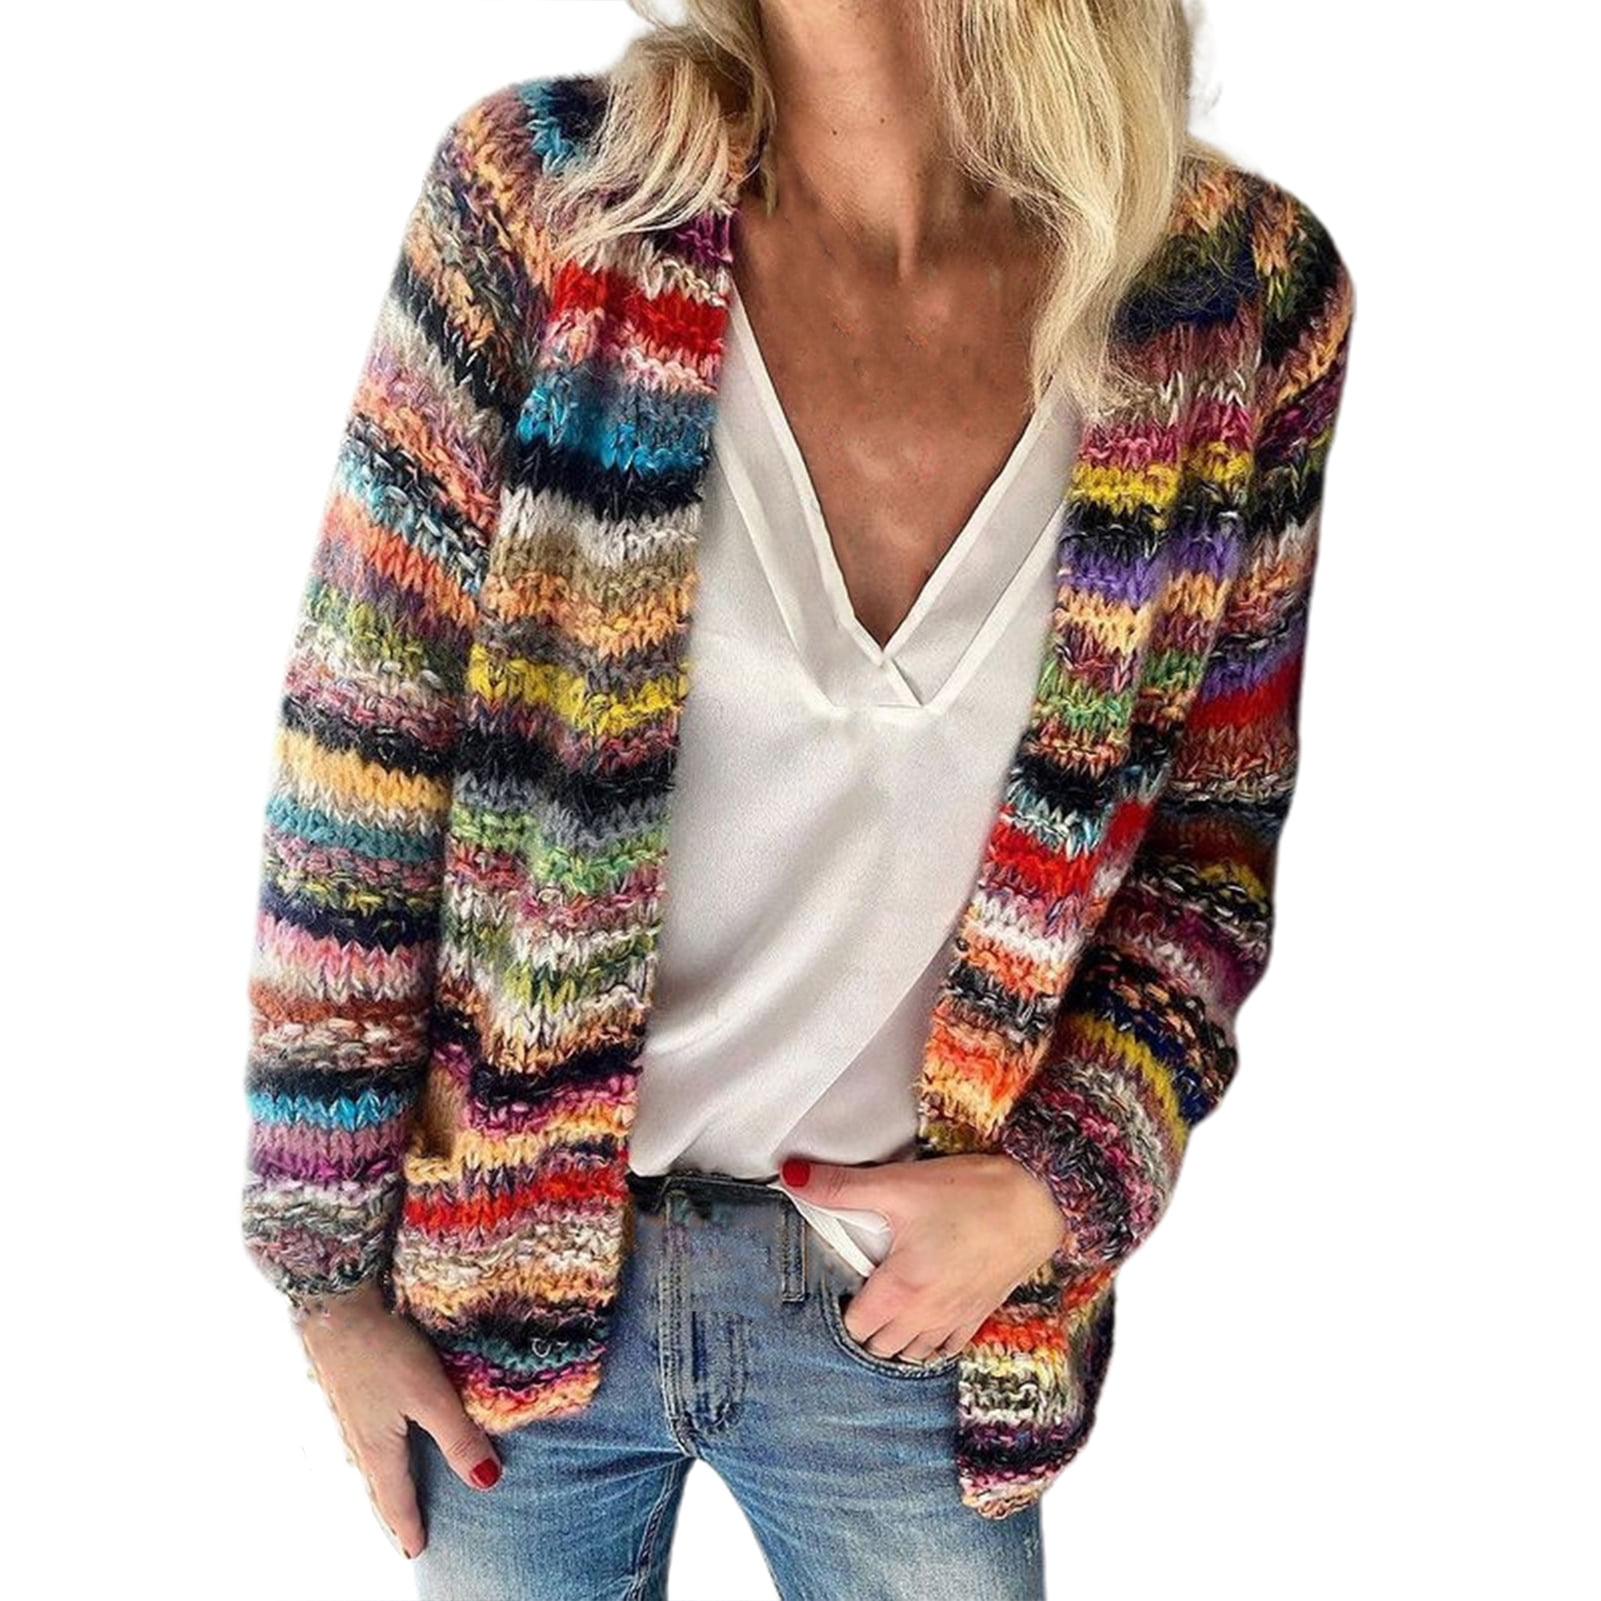 Hot Womens V-necked Sweater Looose Knitted Cardigan Rainbow Striped Autumn Coats